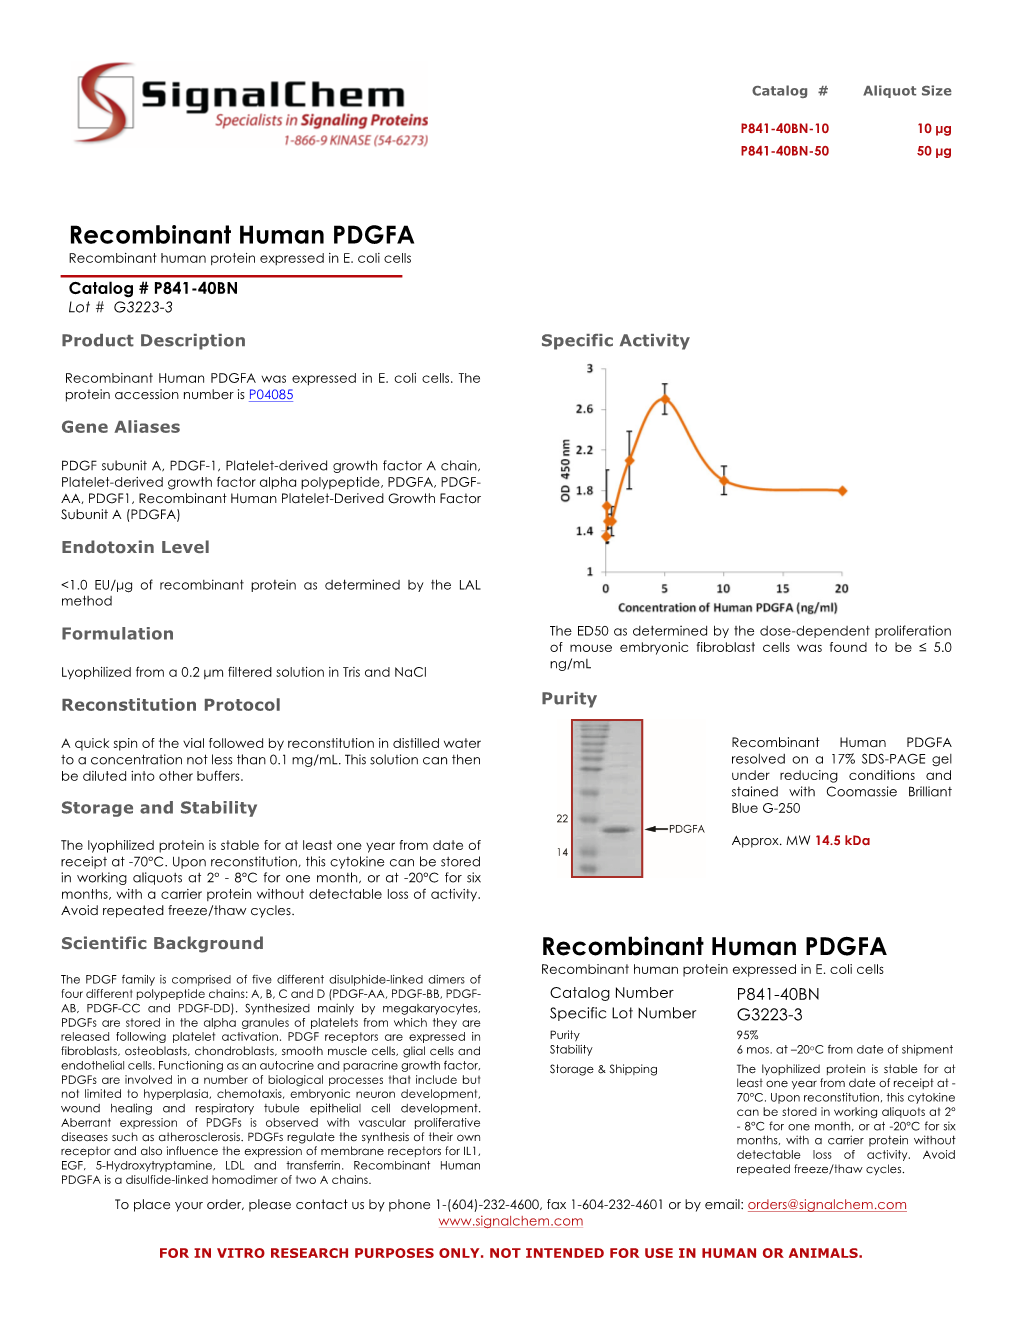 Recombinant Human PDGFA Recombinant Human Protein Expressed in E